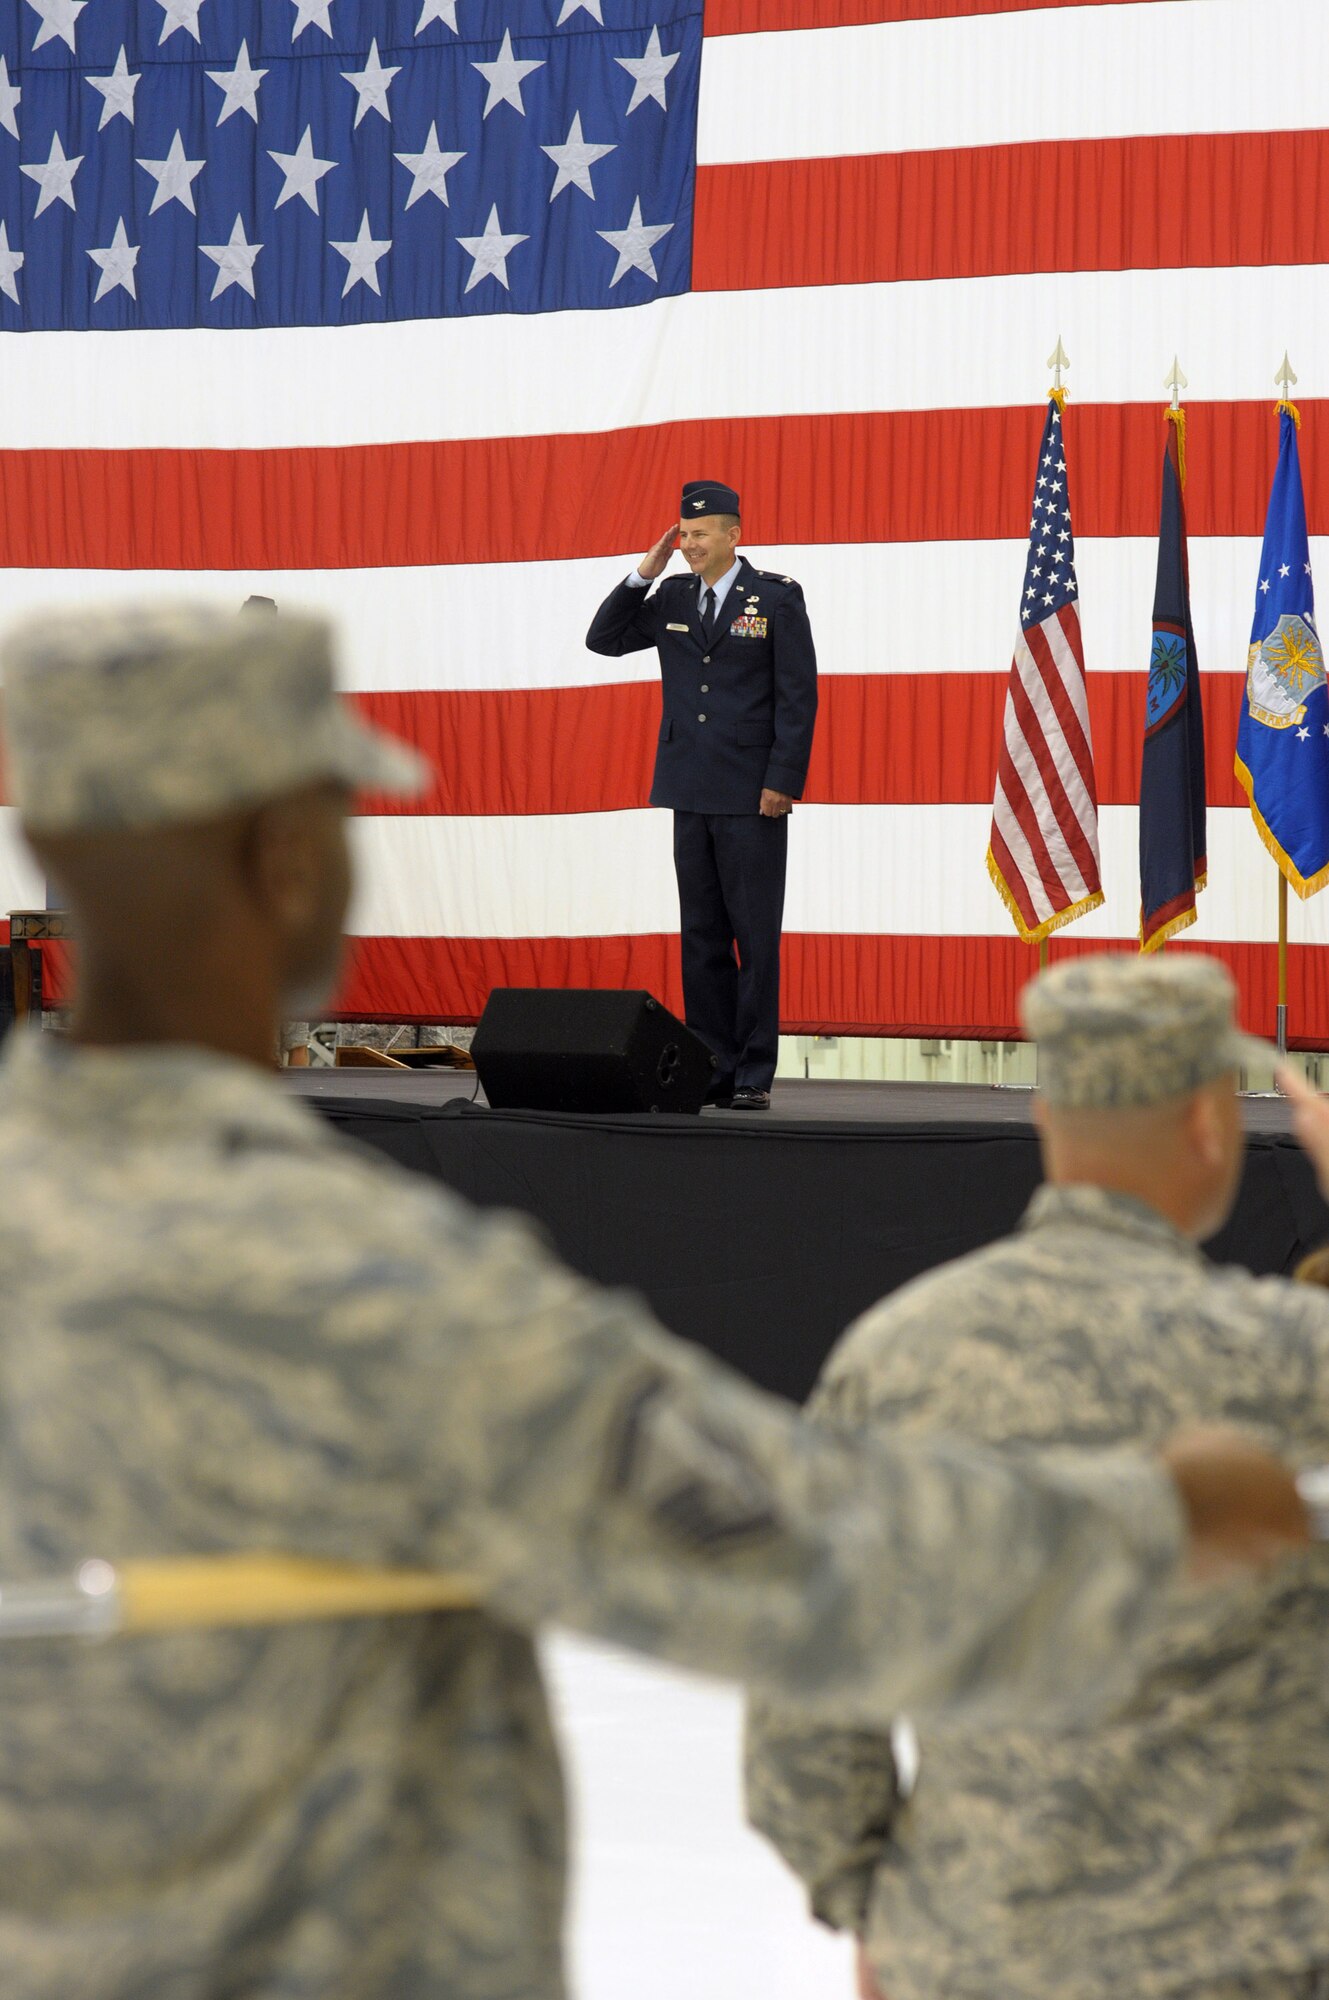 ANDERSEN AIR FORCE BASE, Guam - New 36th Mission Support Group commander, Col. Alan Weider receives his initial salute from the assembled squadrons that fall under the 36th MSG at the change of command ceremony held in Hangar 6 June 16. The change of command ceremony transferred leadership of the 36th MSG from Col. Mark Talley to Colonel Wieder. (U.S. Air Force photo by Tech. Sgt. Michael Boquette)
